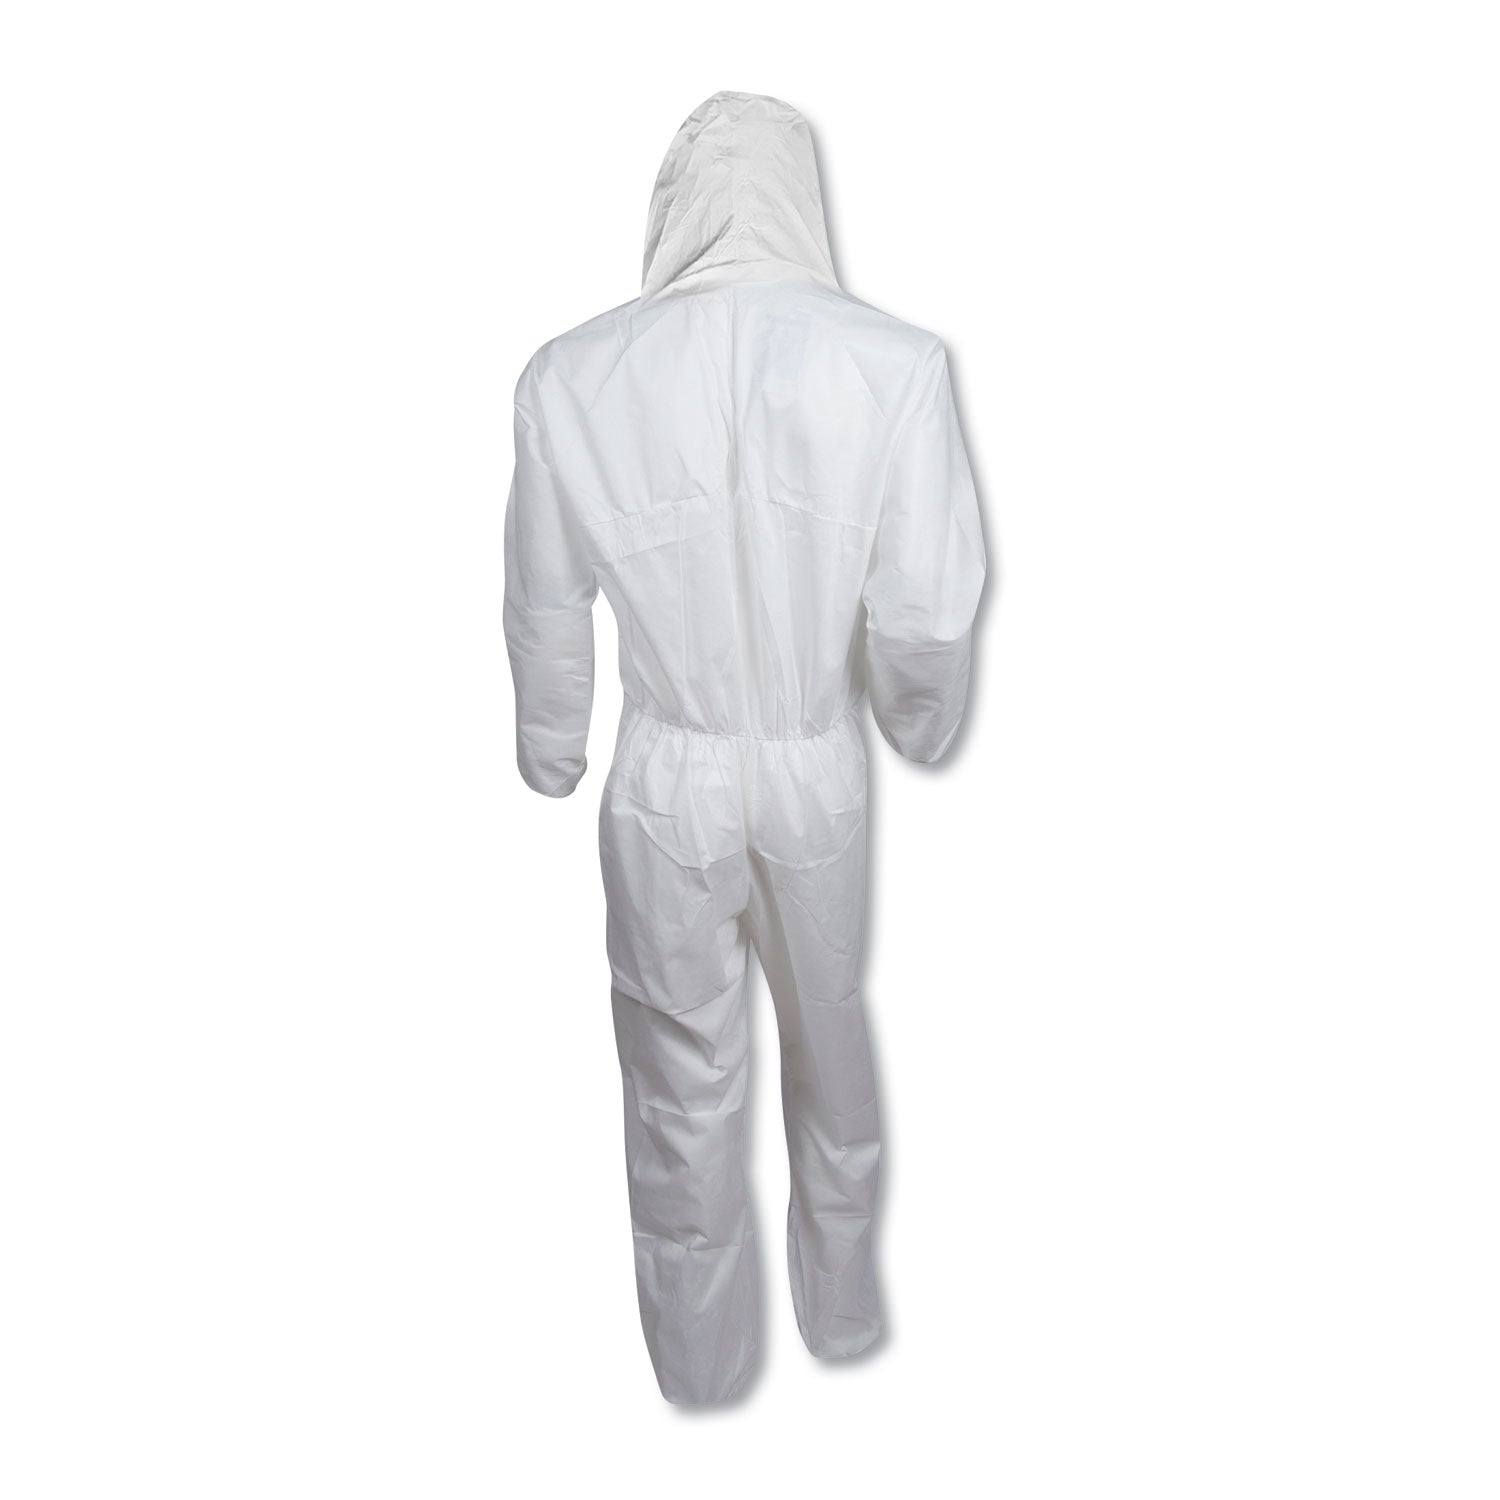 a20-breathable-particle-protection-coveralls-zip-closure-2x-large-white_kcc49115 - 6